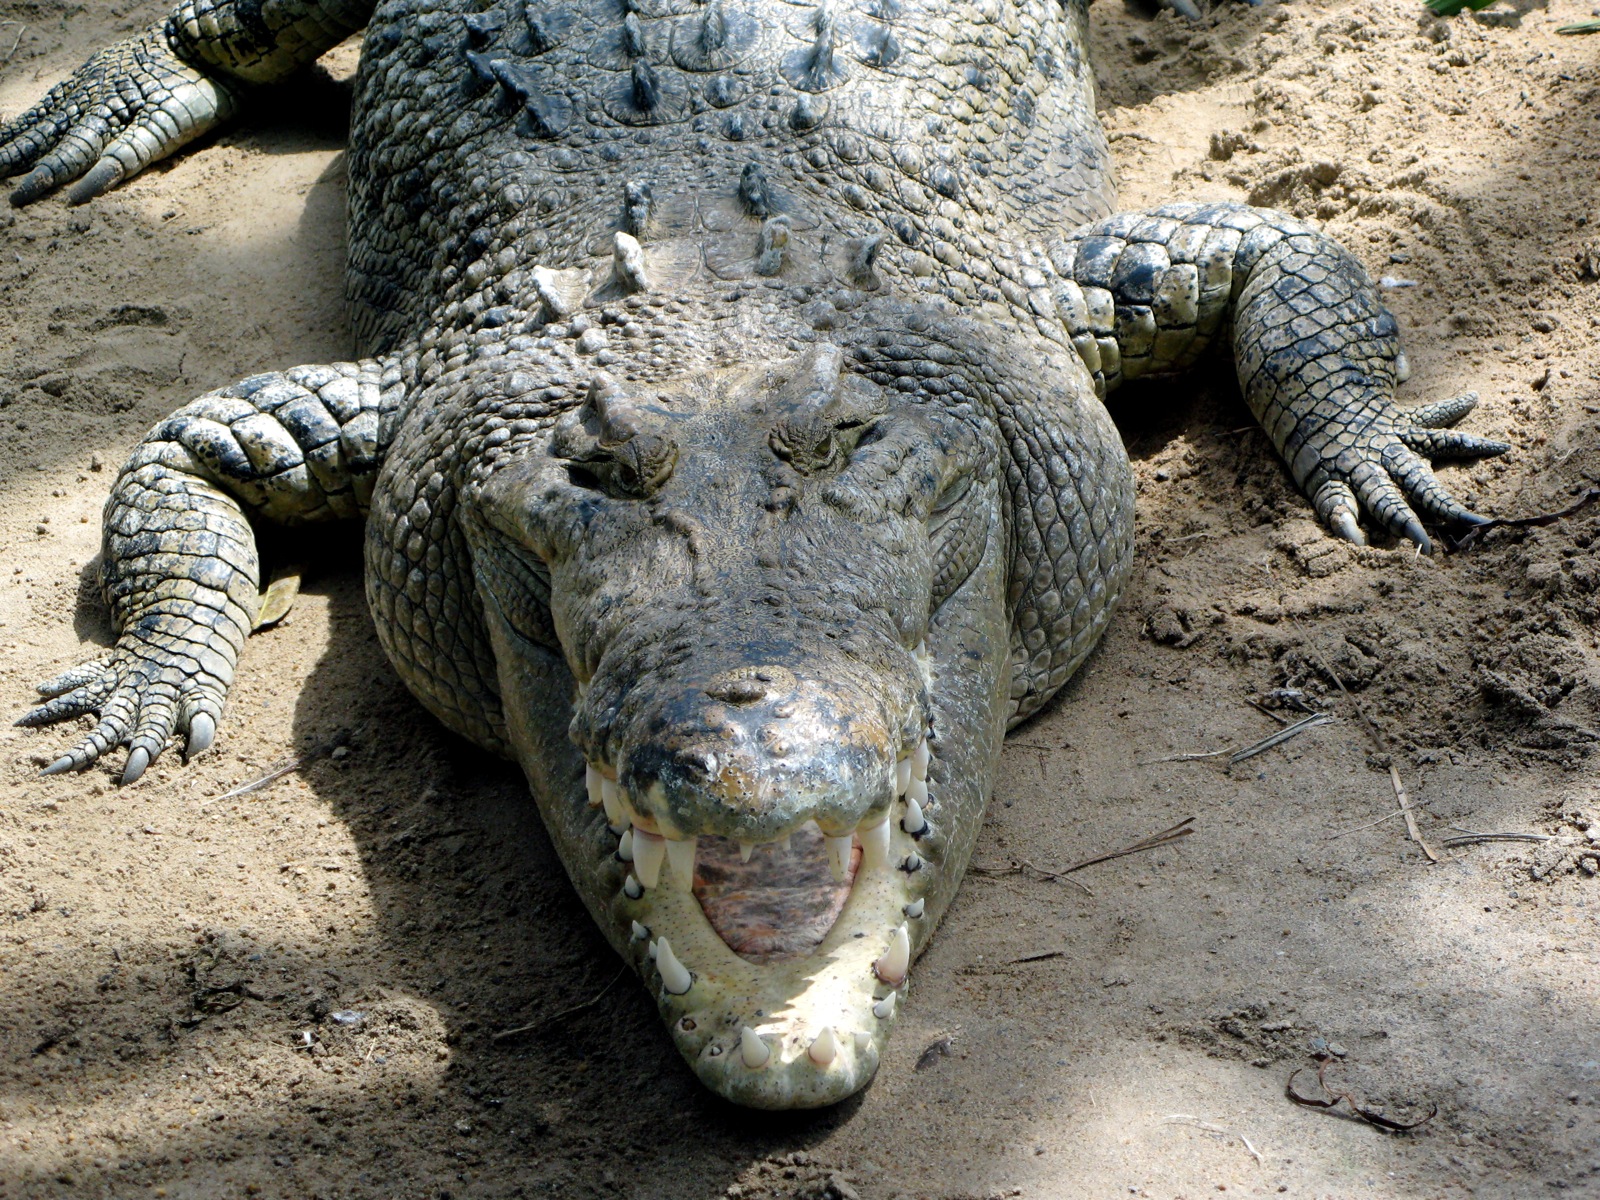 an alligator is lying in the sand on its side